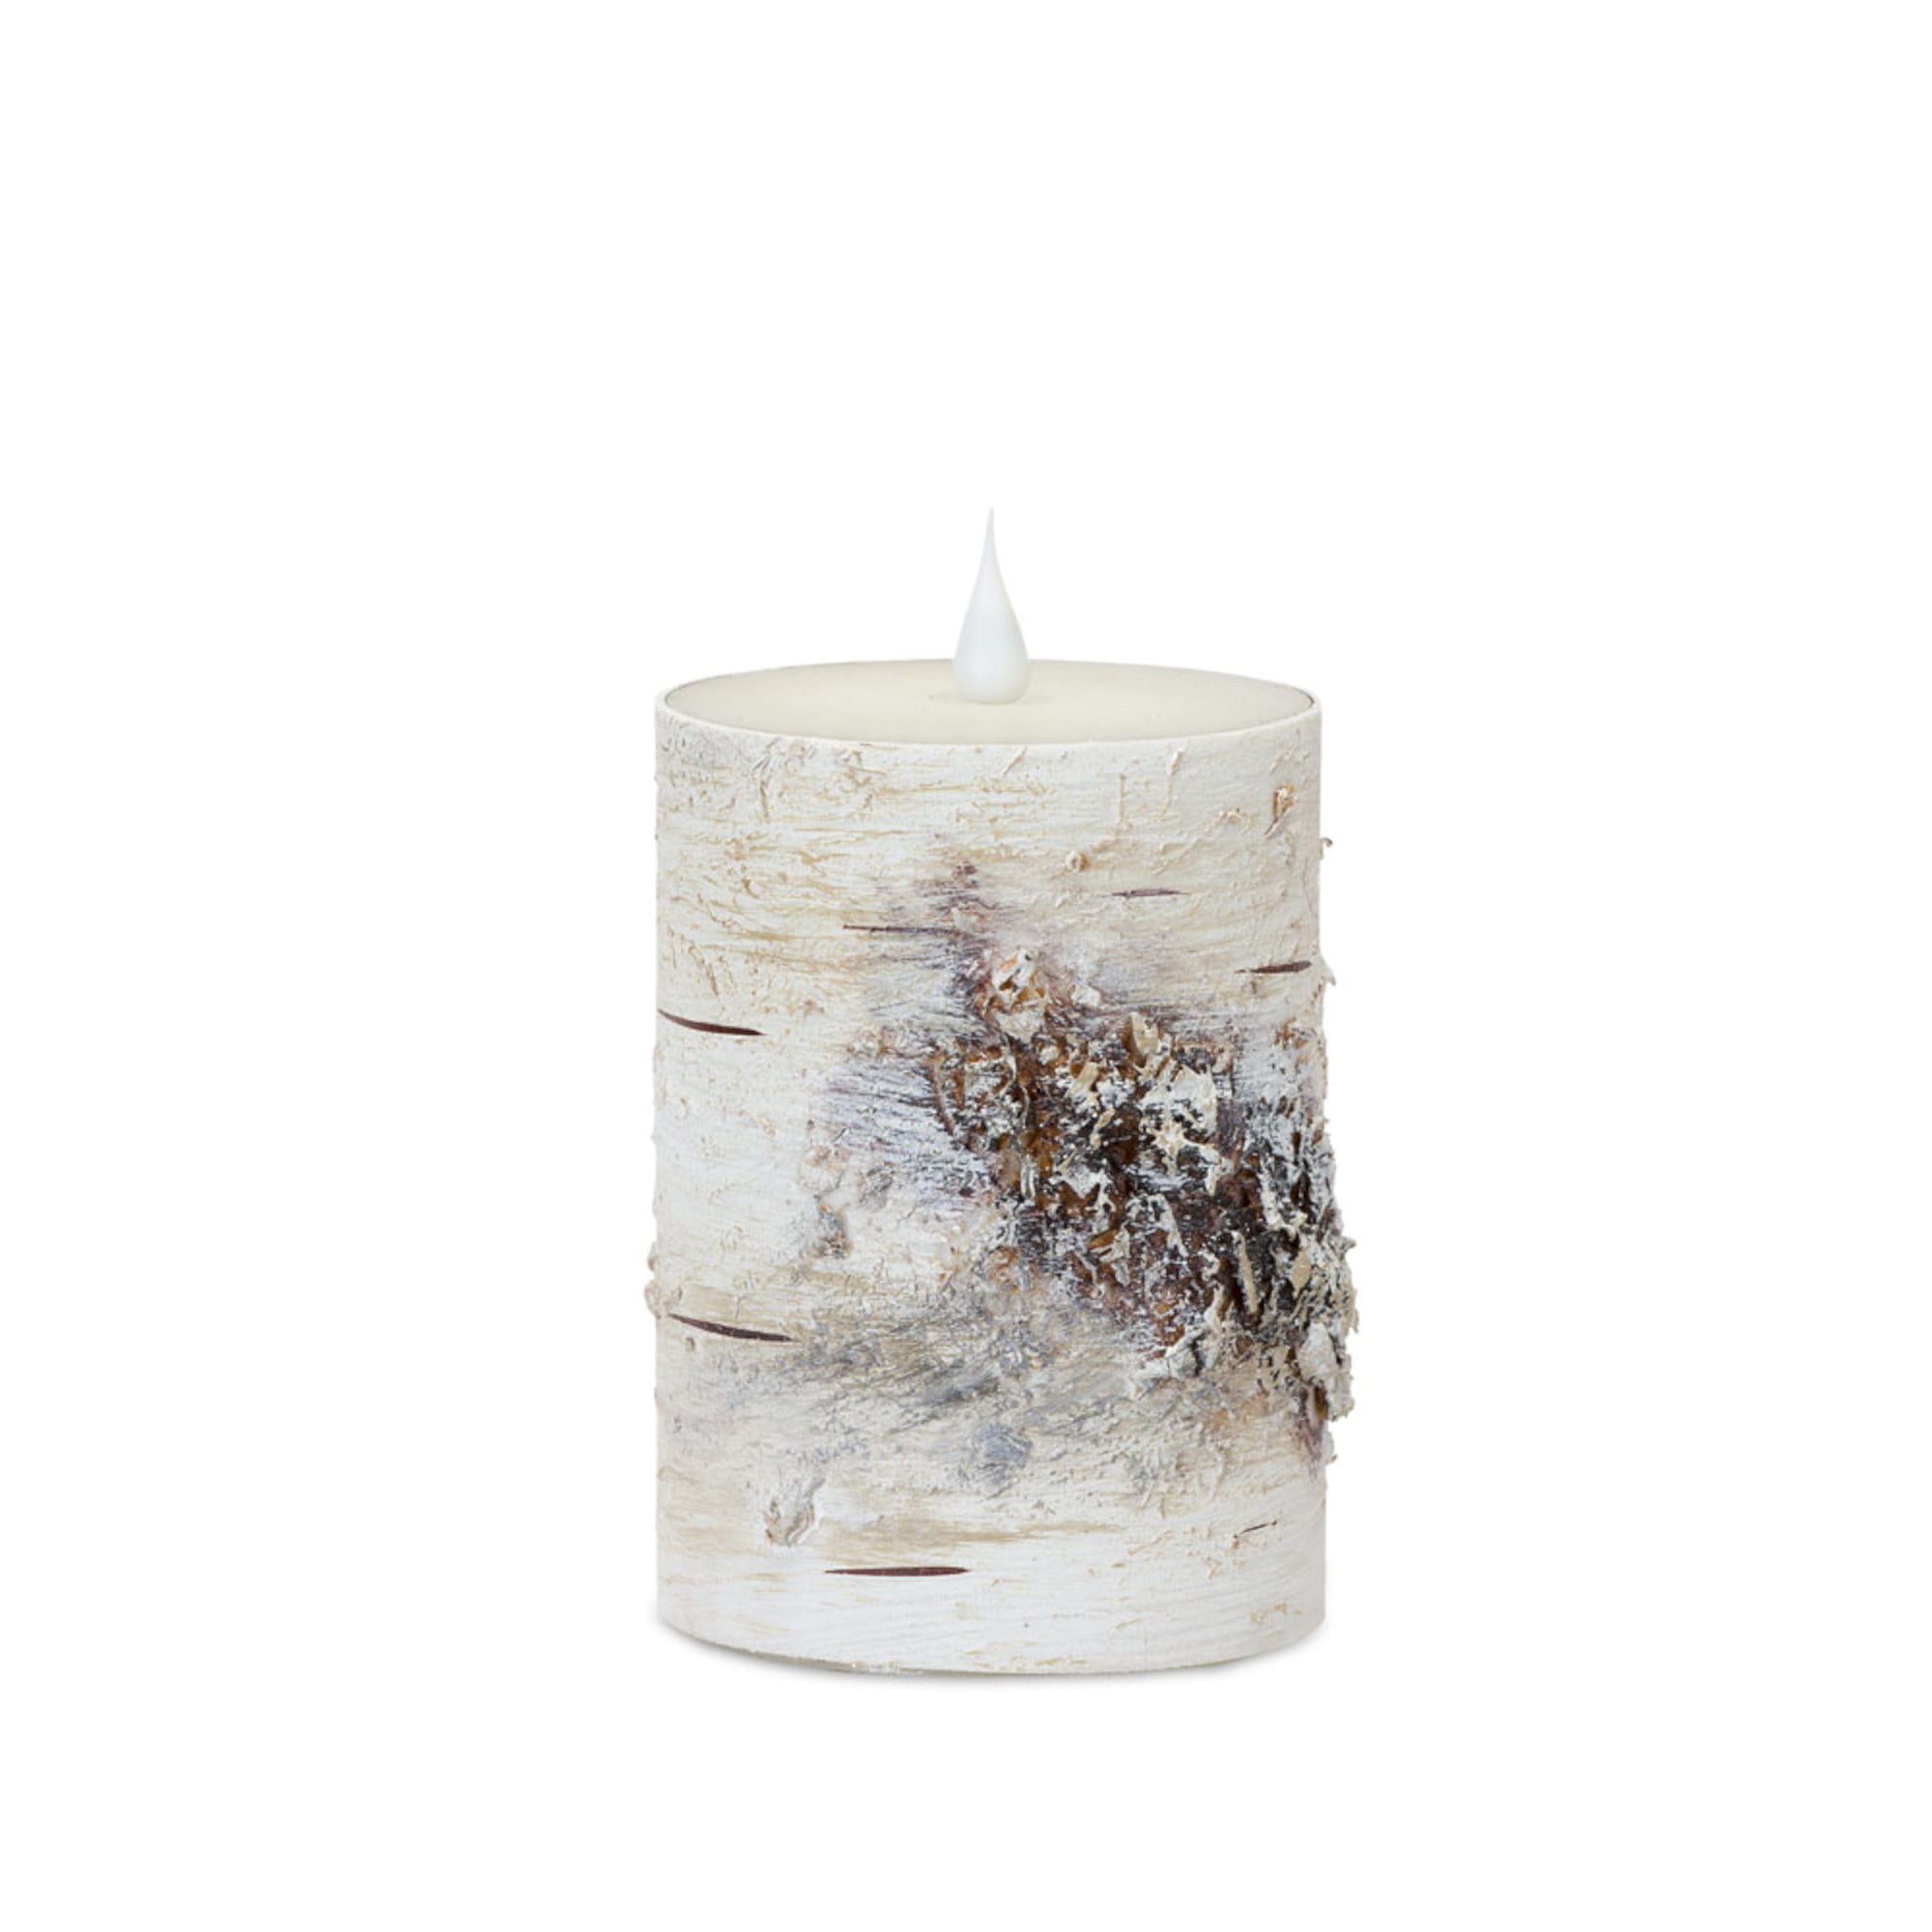 LED Birch Candle 3.5"D x 5"H (Set of 2) with Remote